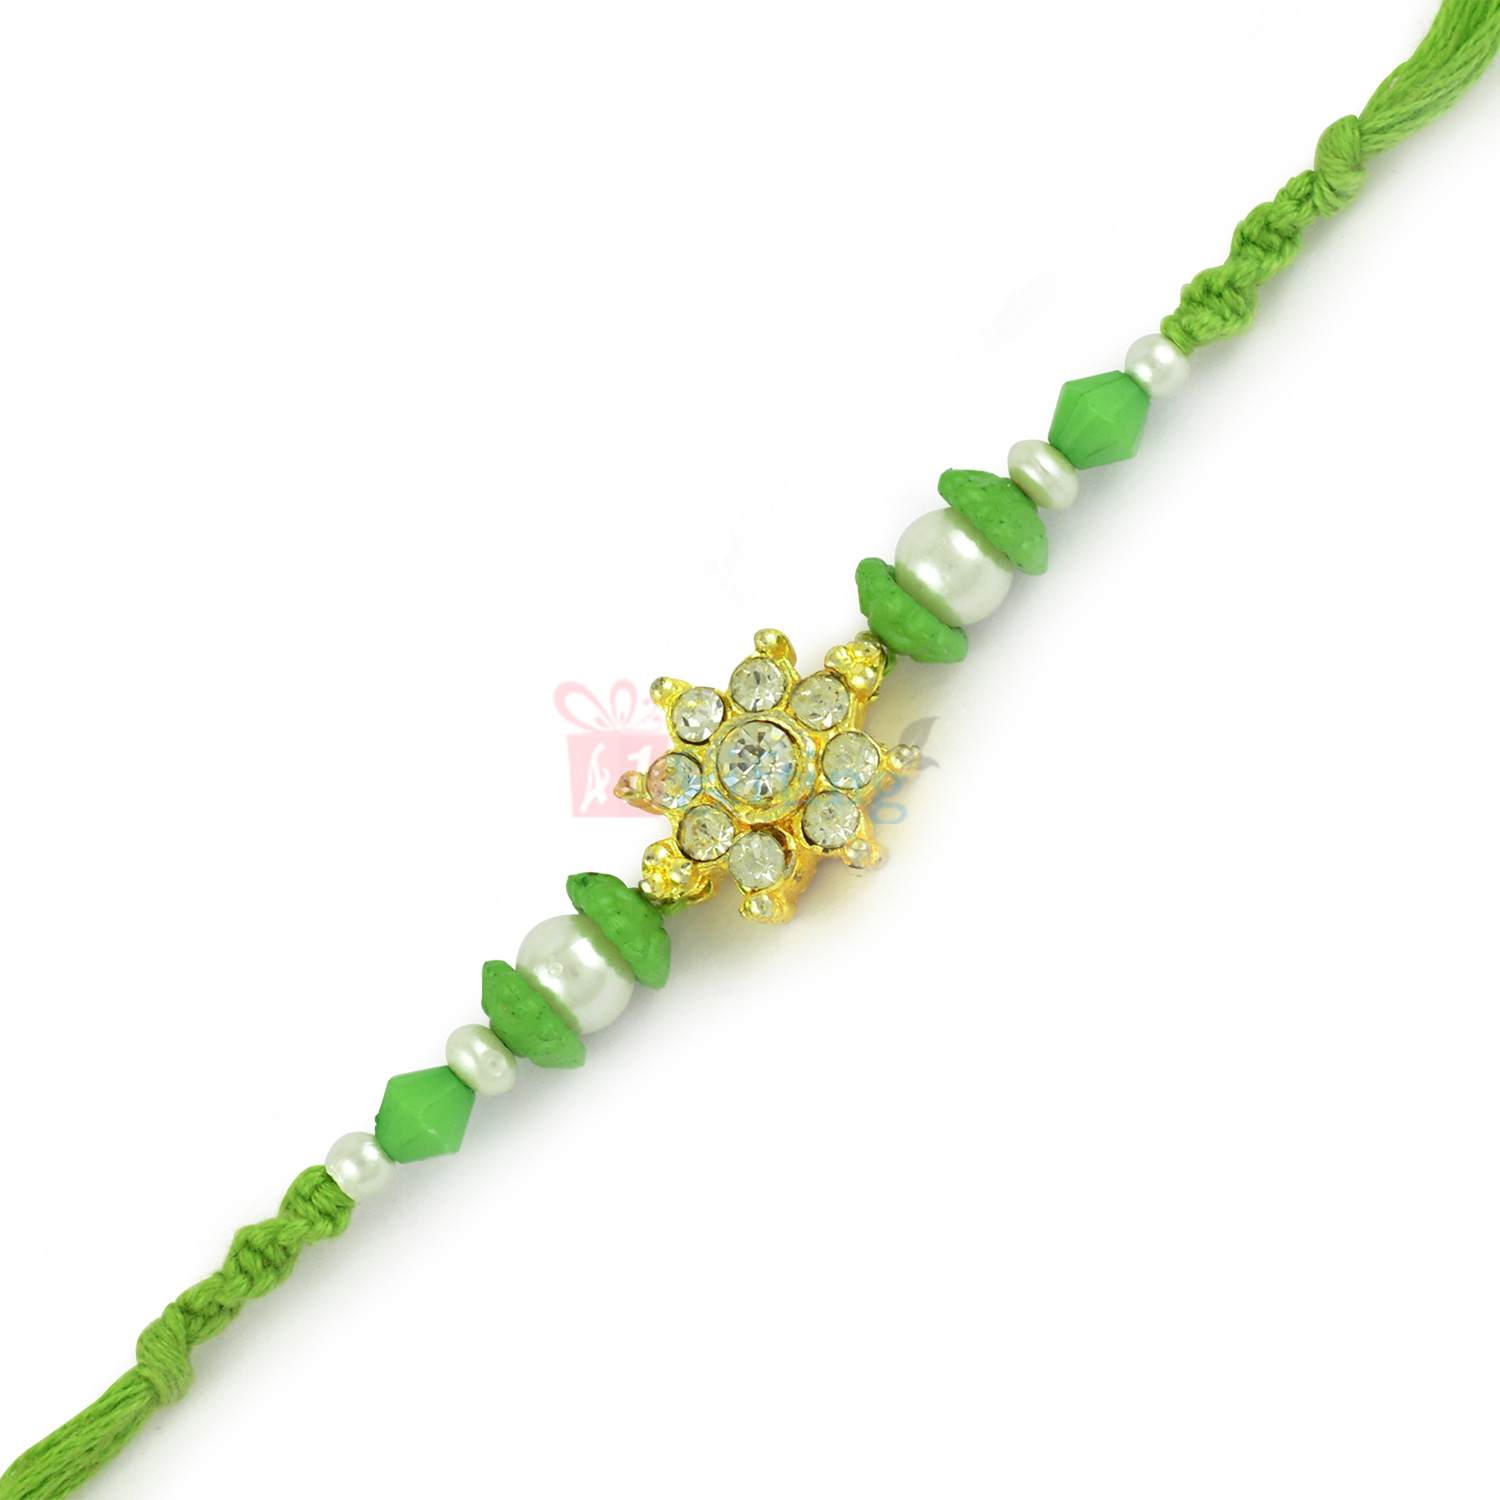 Awesome Diamond Floral with Pearl Rakhi Thread